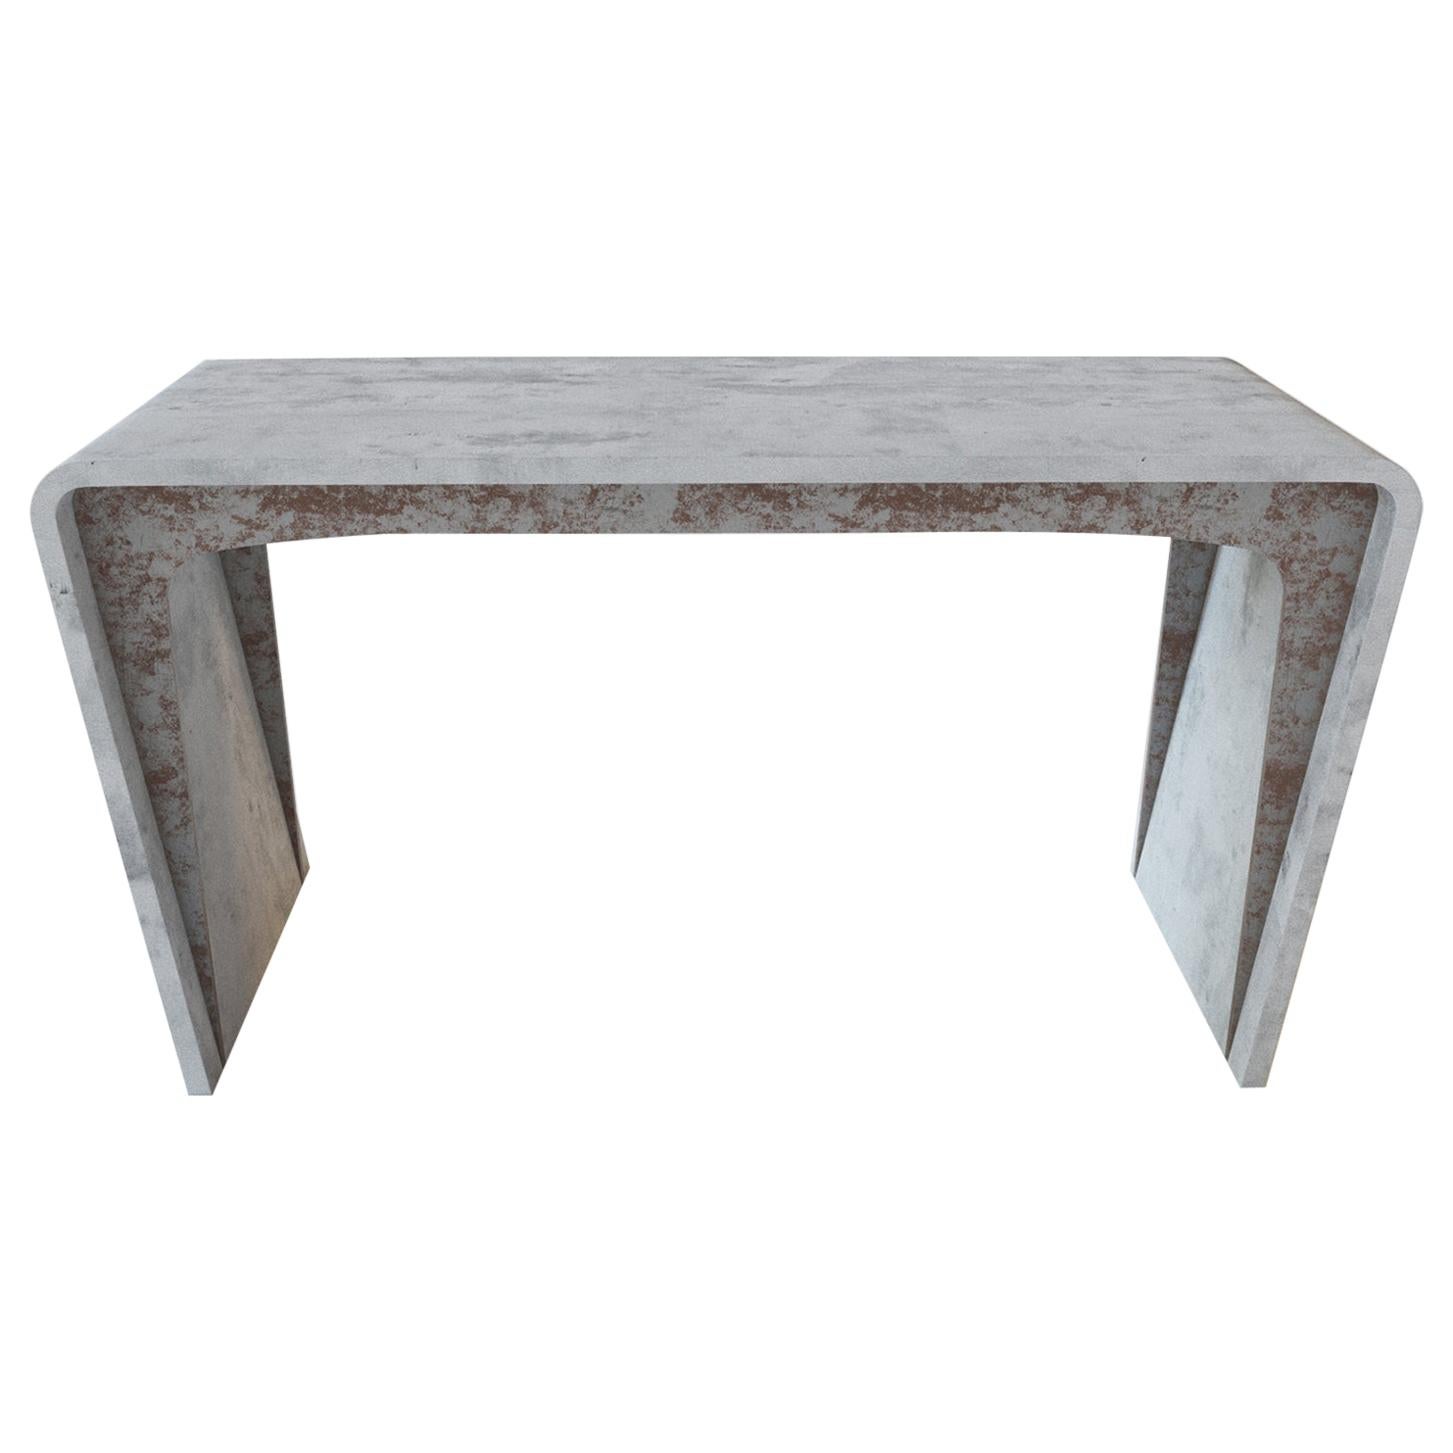 Todos Coffee Table, Concrete Canvas and Metal, by Neal Aronowitz